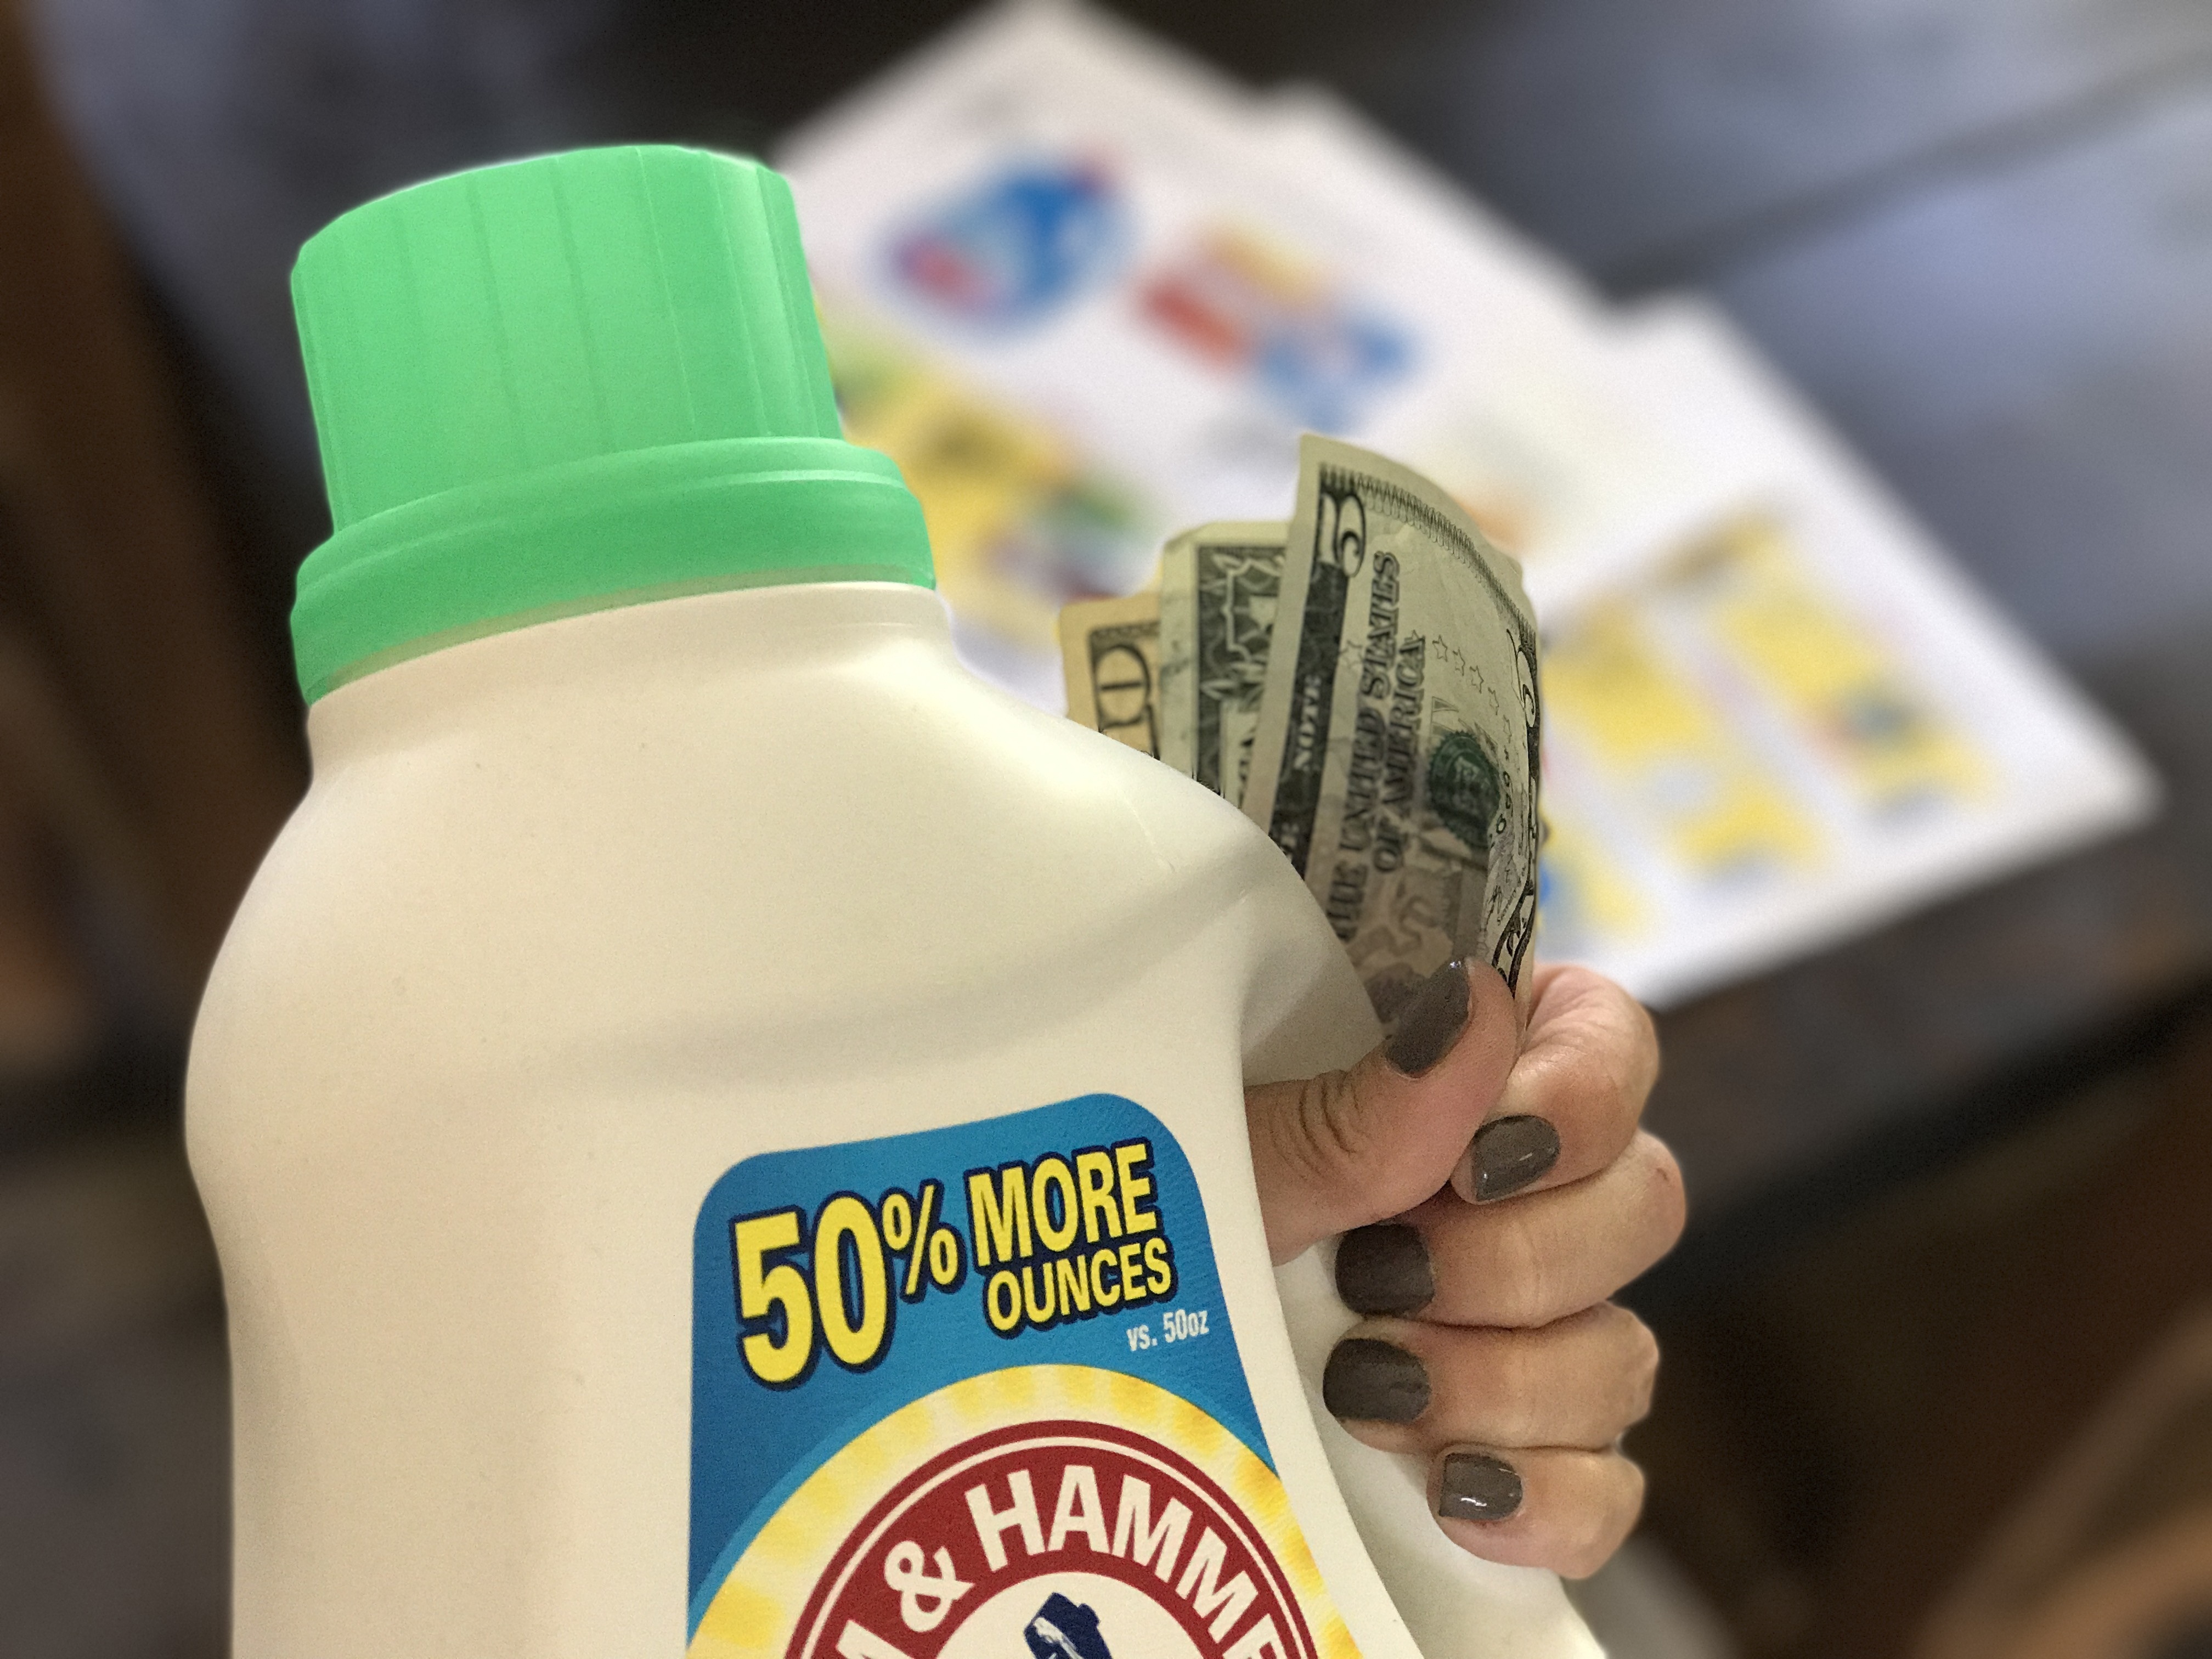 How To Never Pay Full Price For Laundry Detergent - The Krazy Coupon - Free Printable Gain Laundry Detergent Coupons